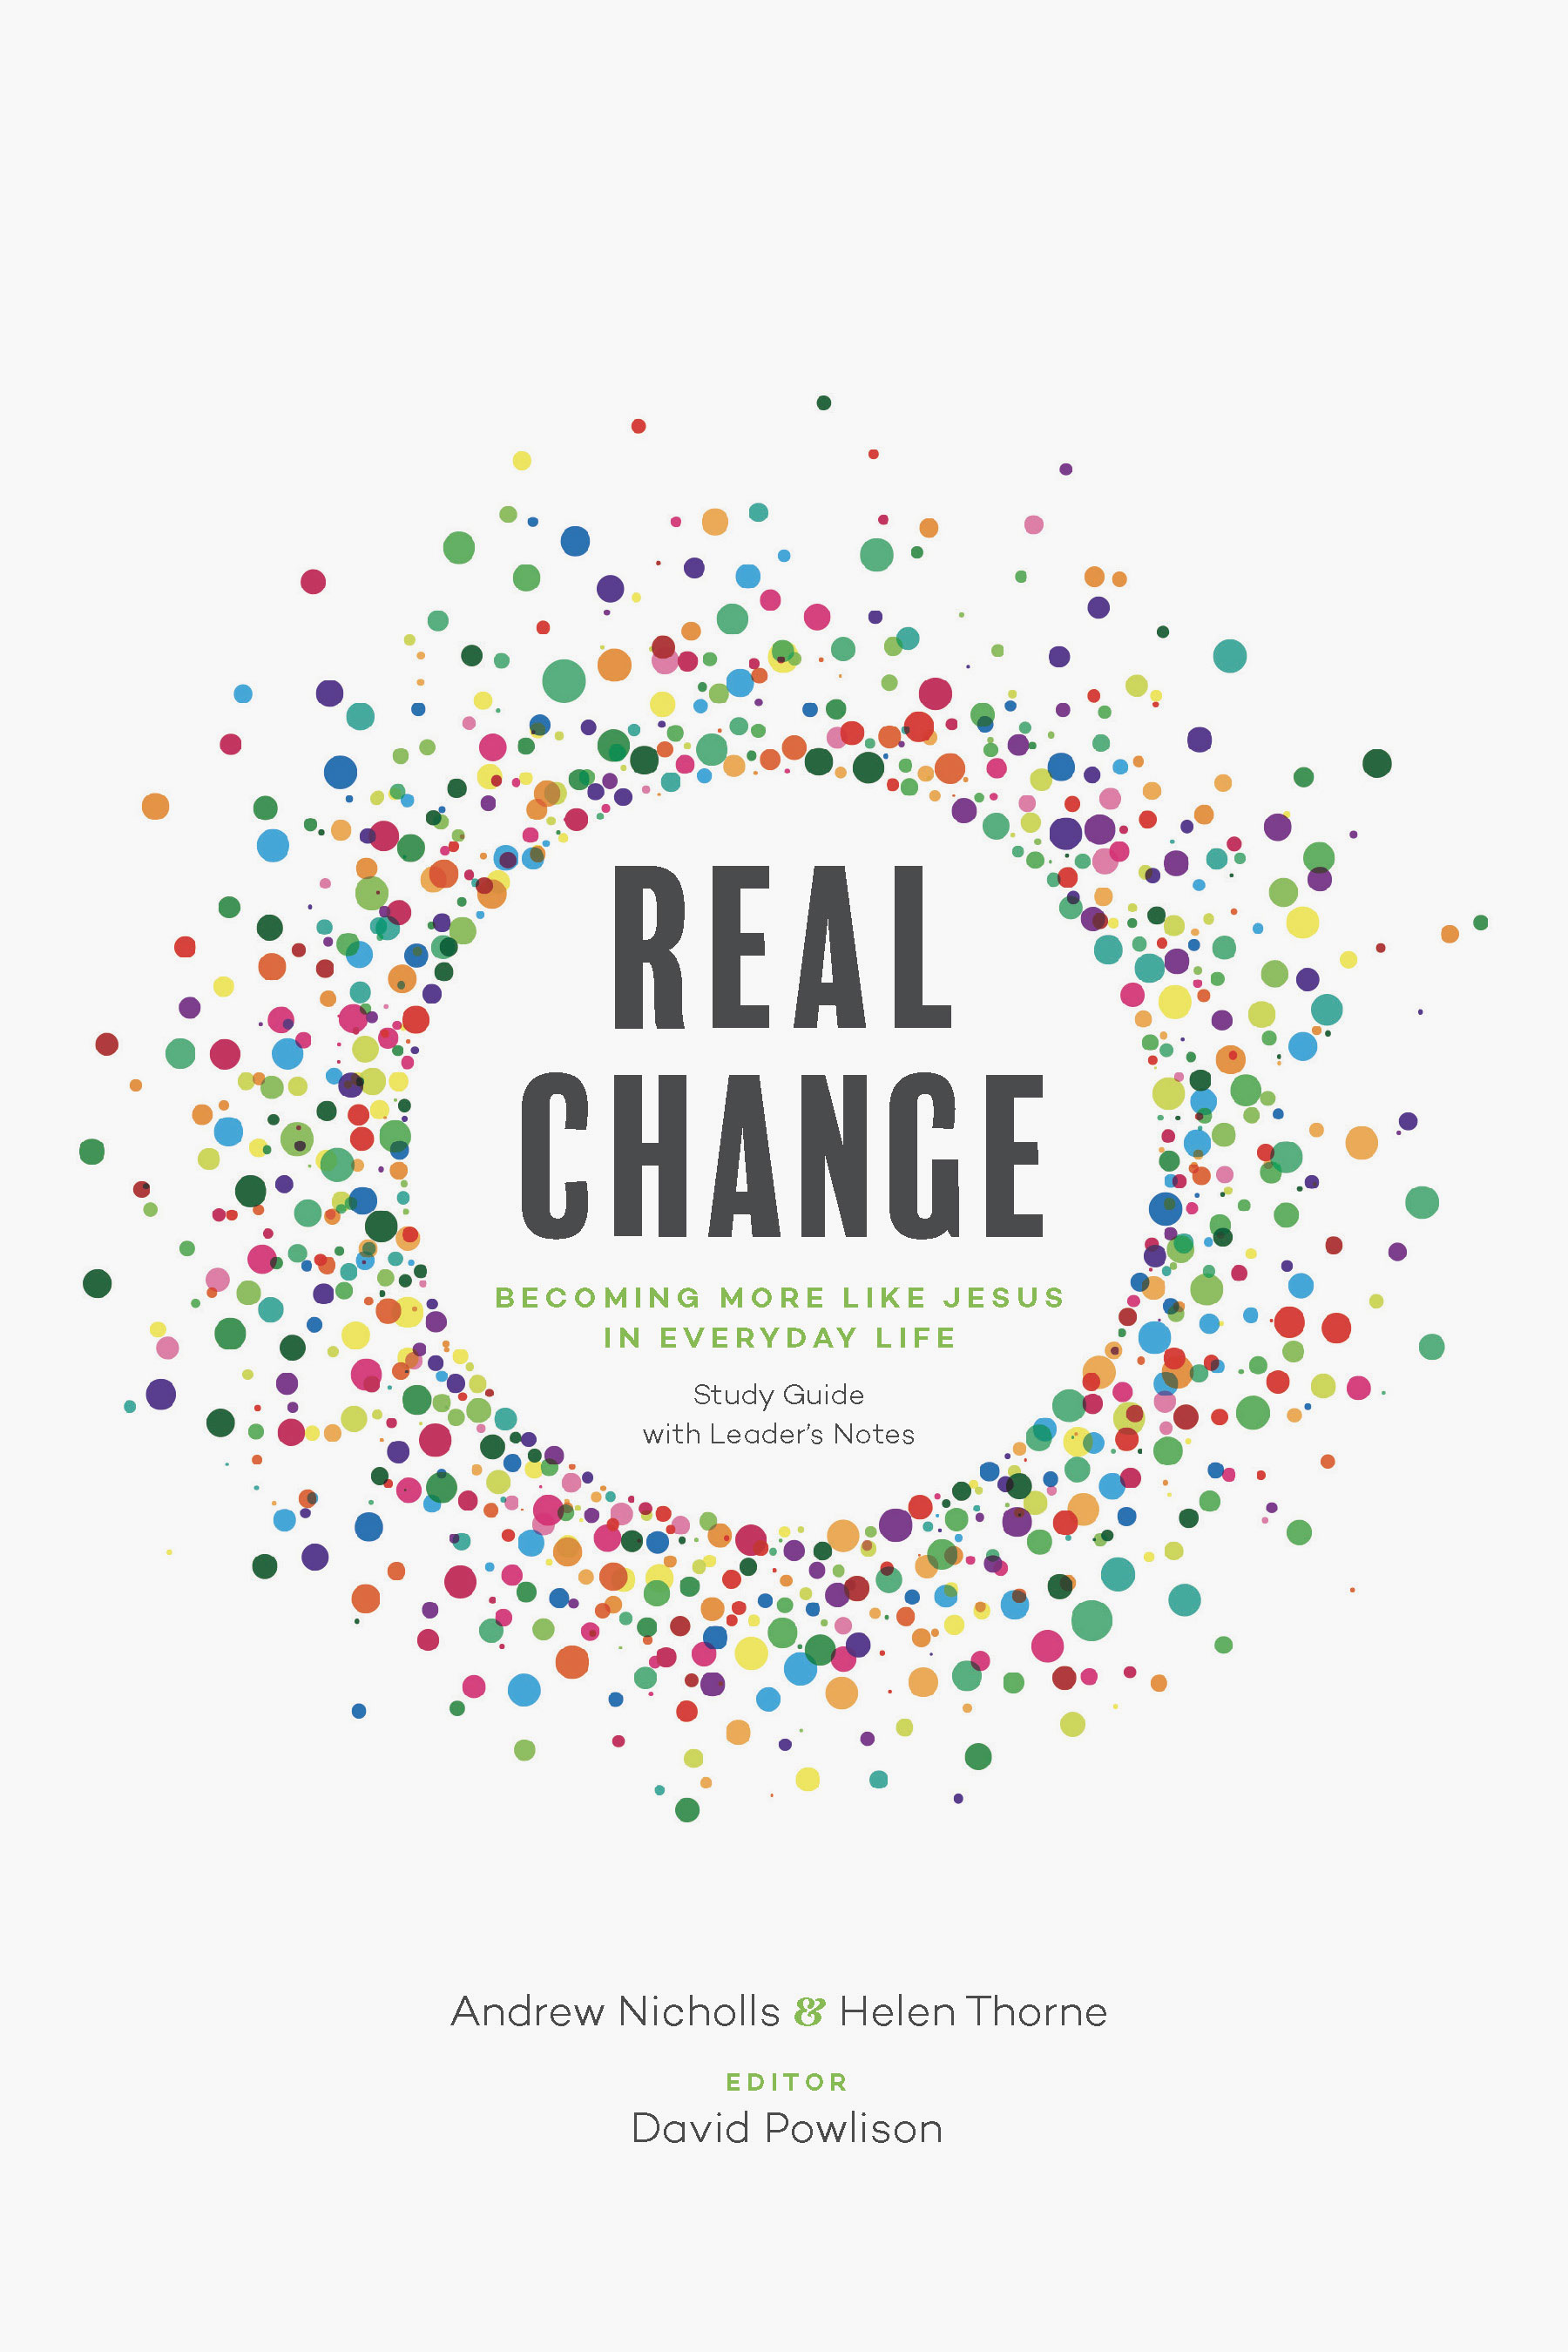 Real Change - Becoming More Like Jesus in Everyday Life UK